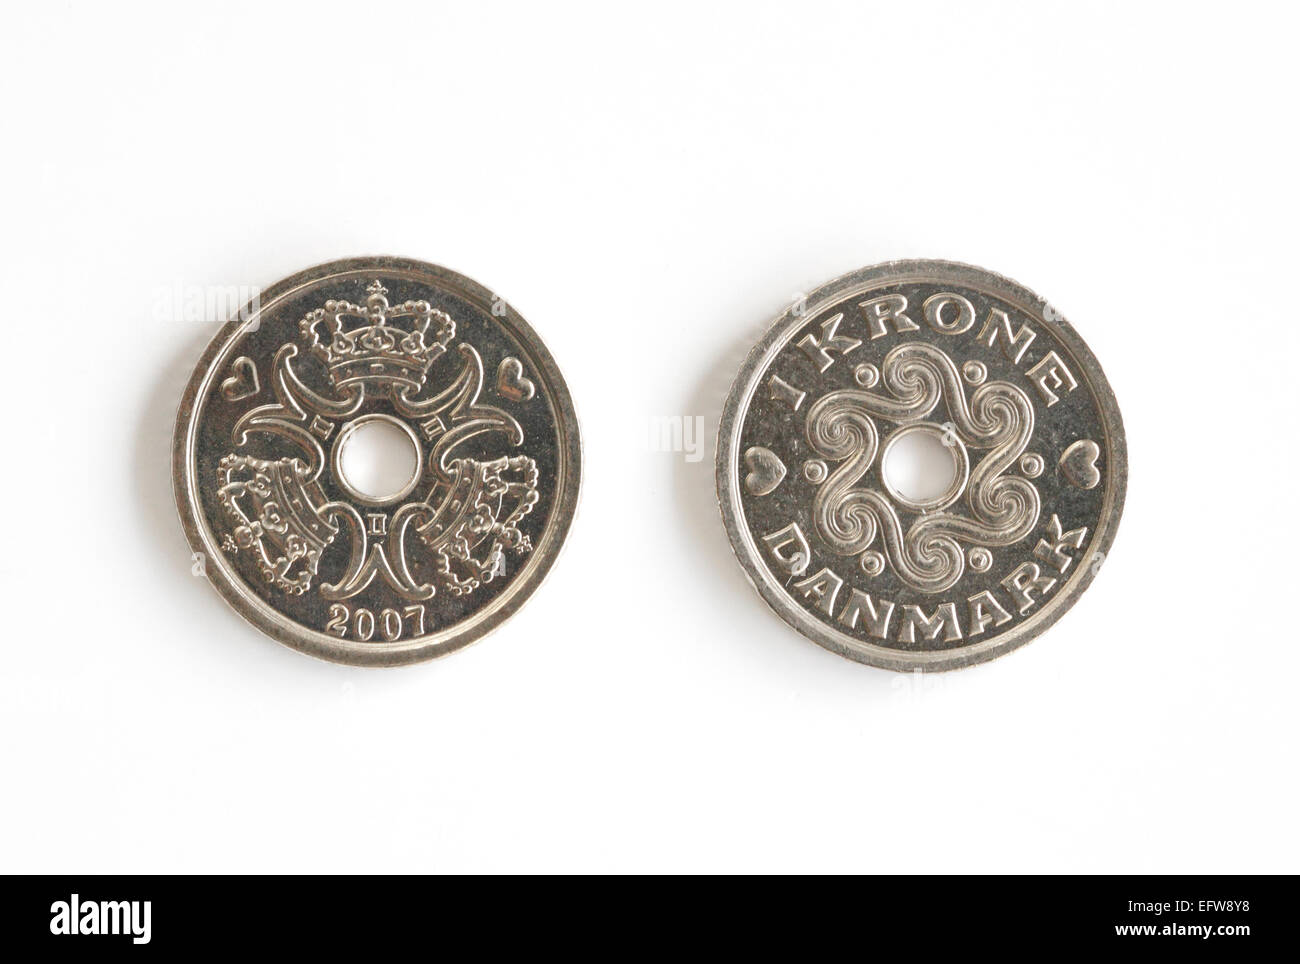 Two Danish one Kroner pieces on a white background Stock Photo